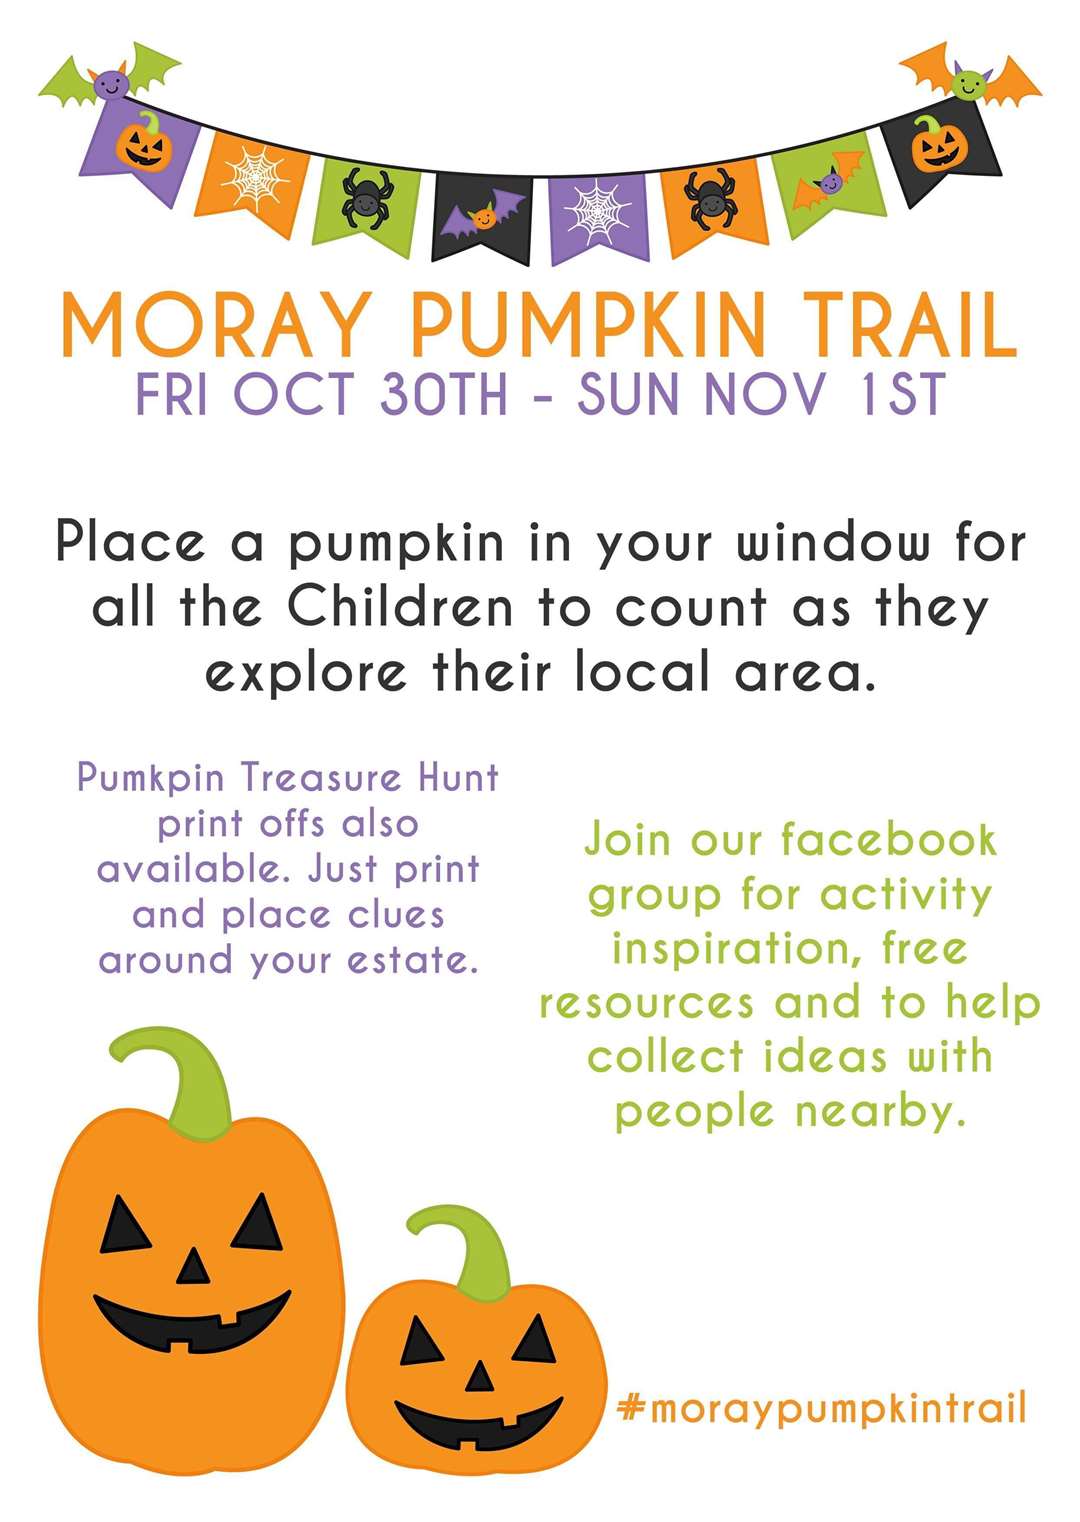 A poster for the Moray pumpkin trail, created by Emma Vaccaro.